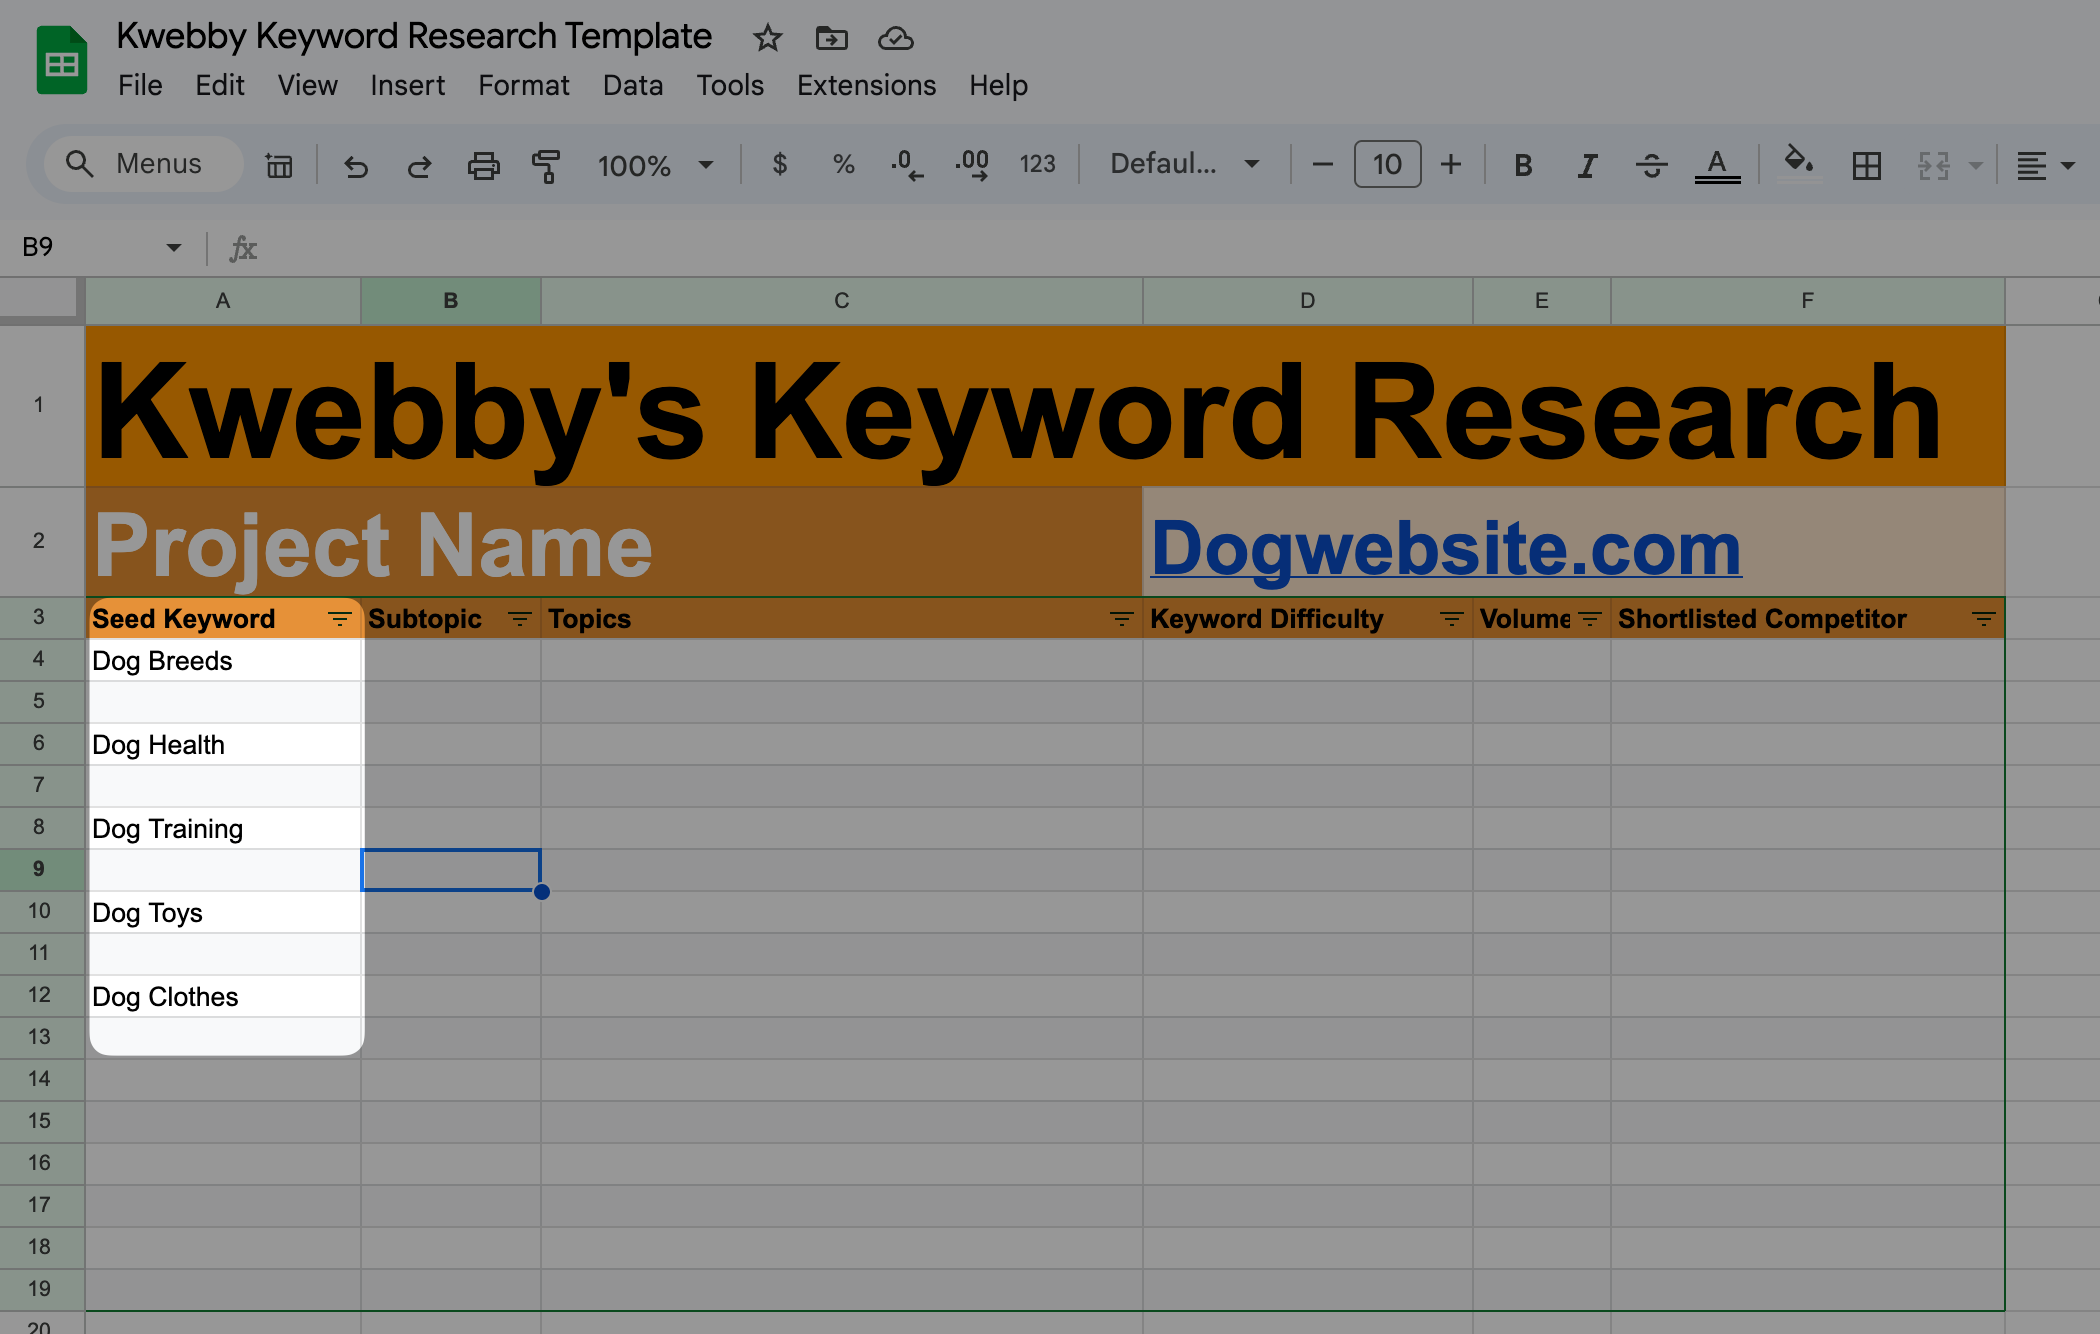 How to do Keyword Research for New Sites to Get 100k Traffic (Template Inside) 1